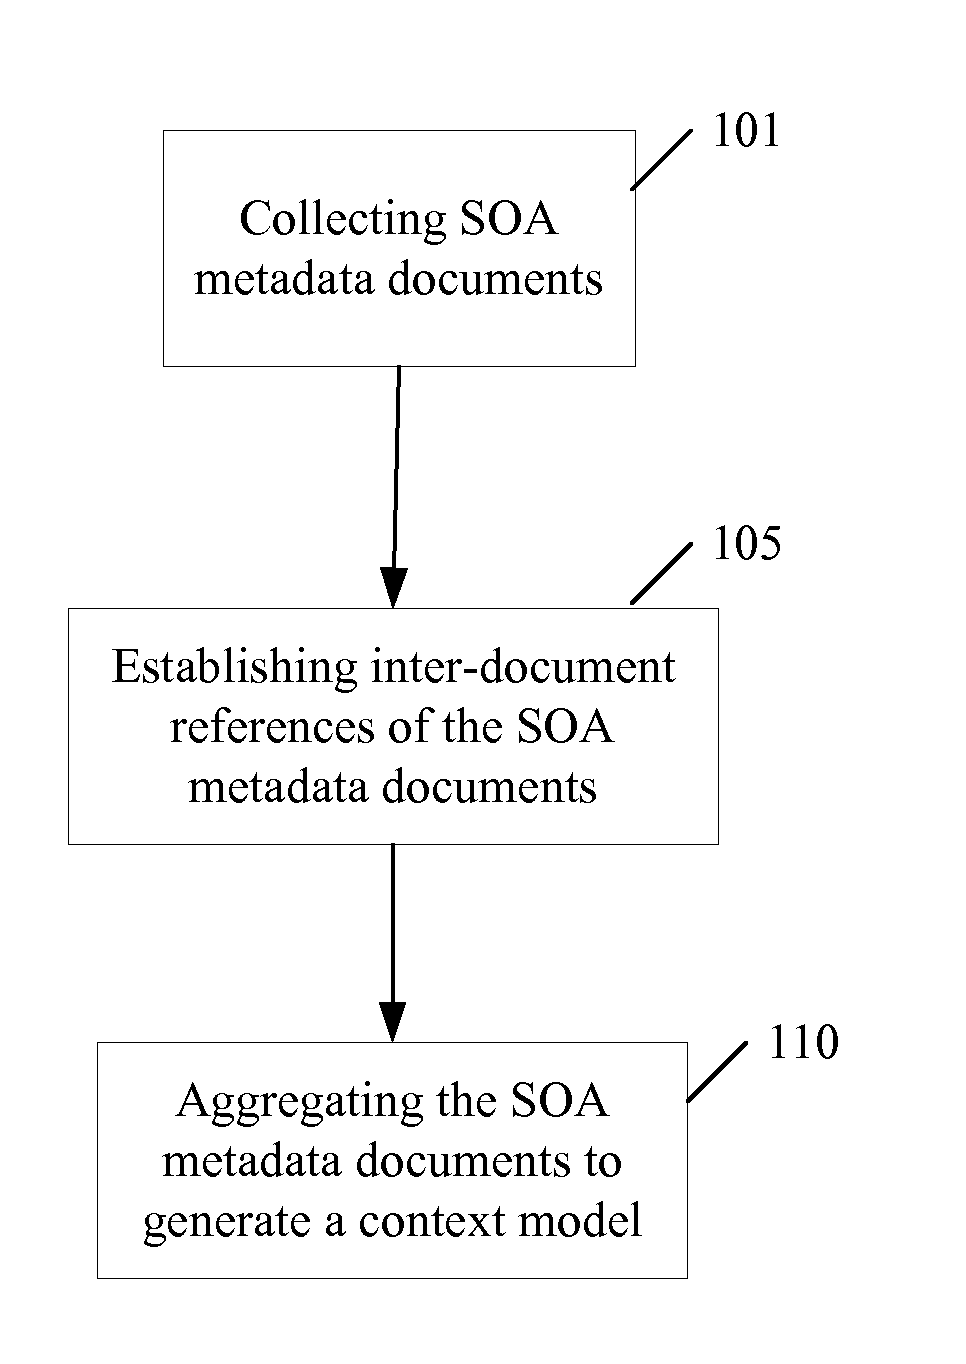 Generating a service-oriented architecture policy based on a context model